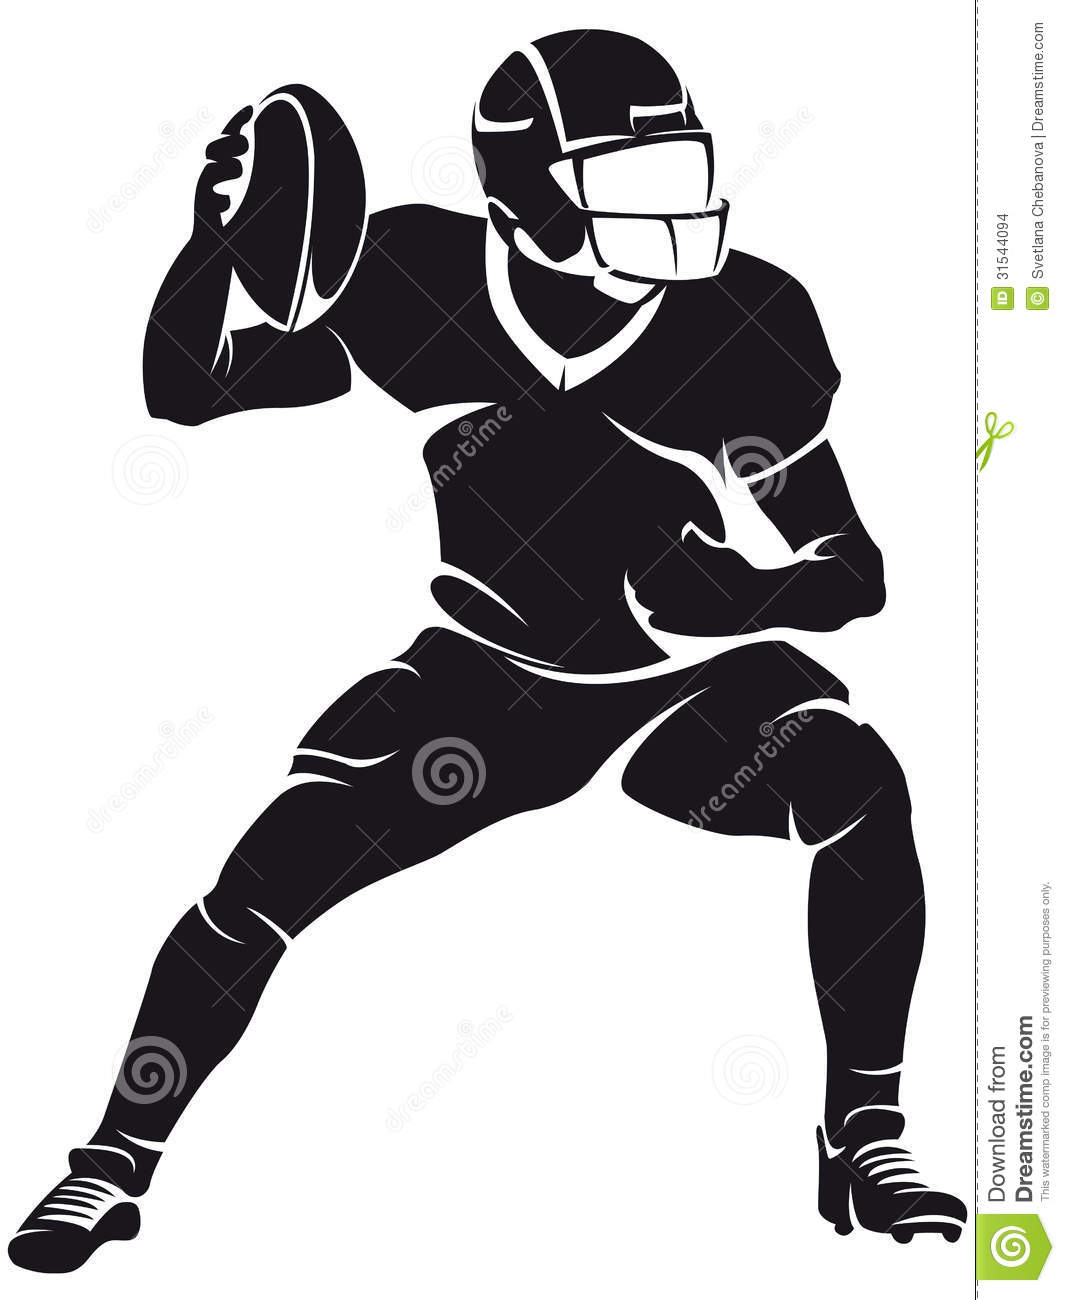 American Football Player Silhouette Stock Images   Image  31544094